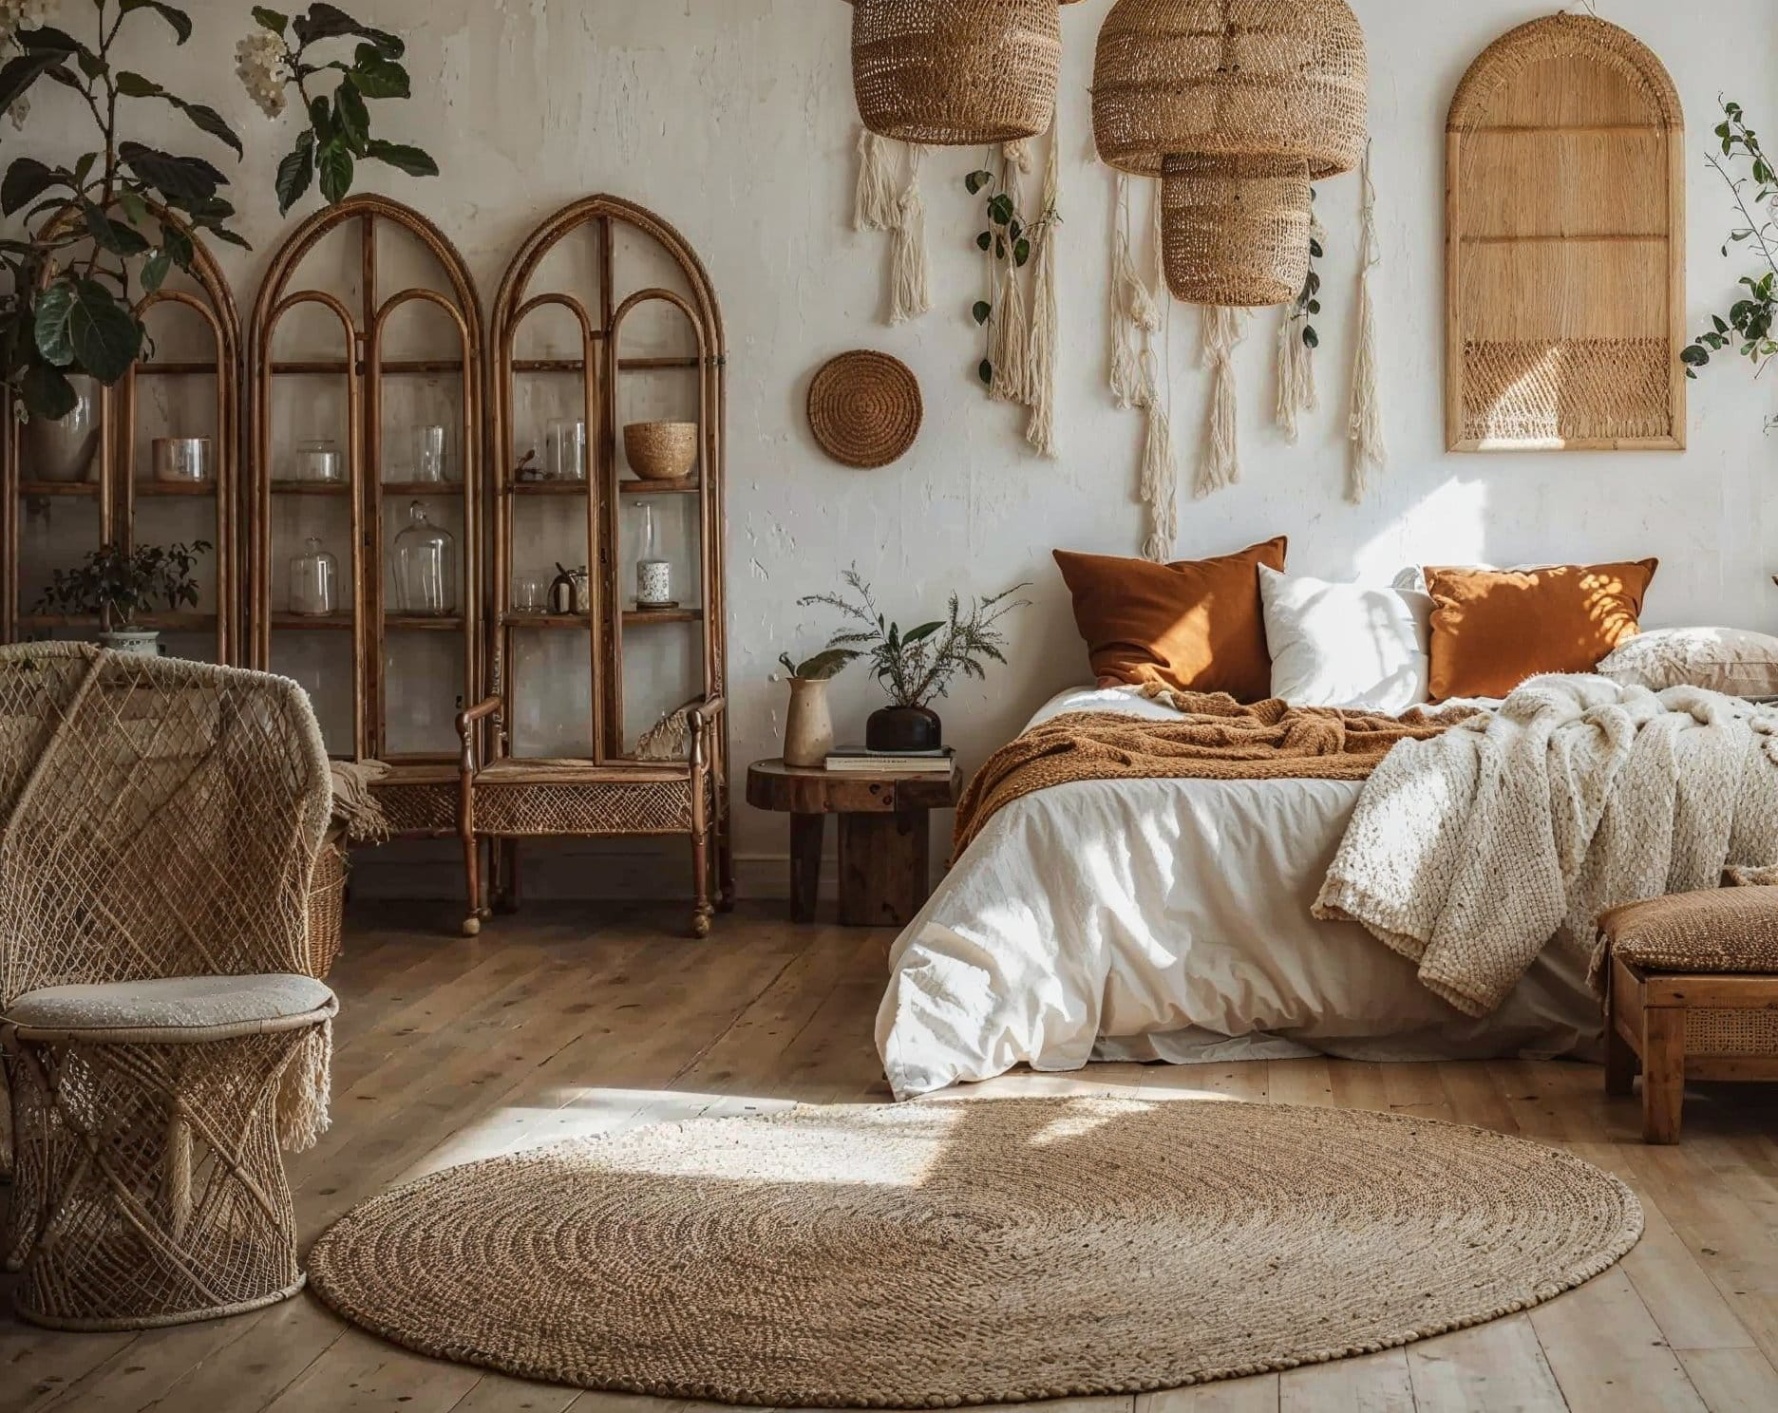 Create A Boho-Chic Vibe: Tips For Designing Your Dream Boho Room